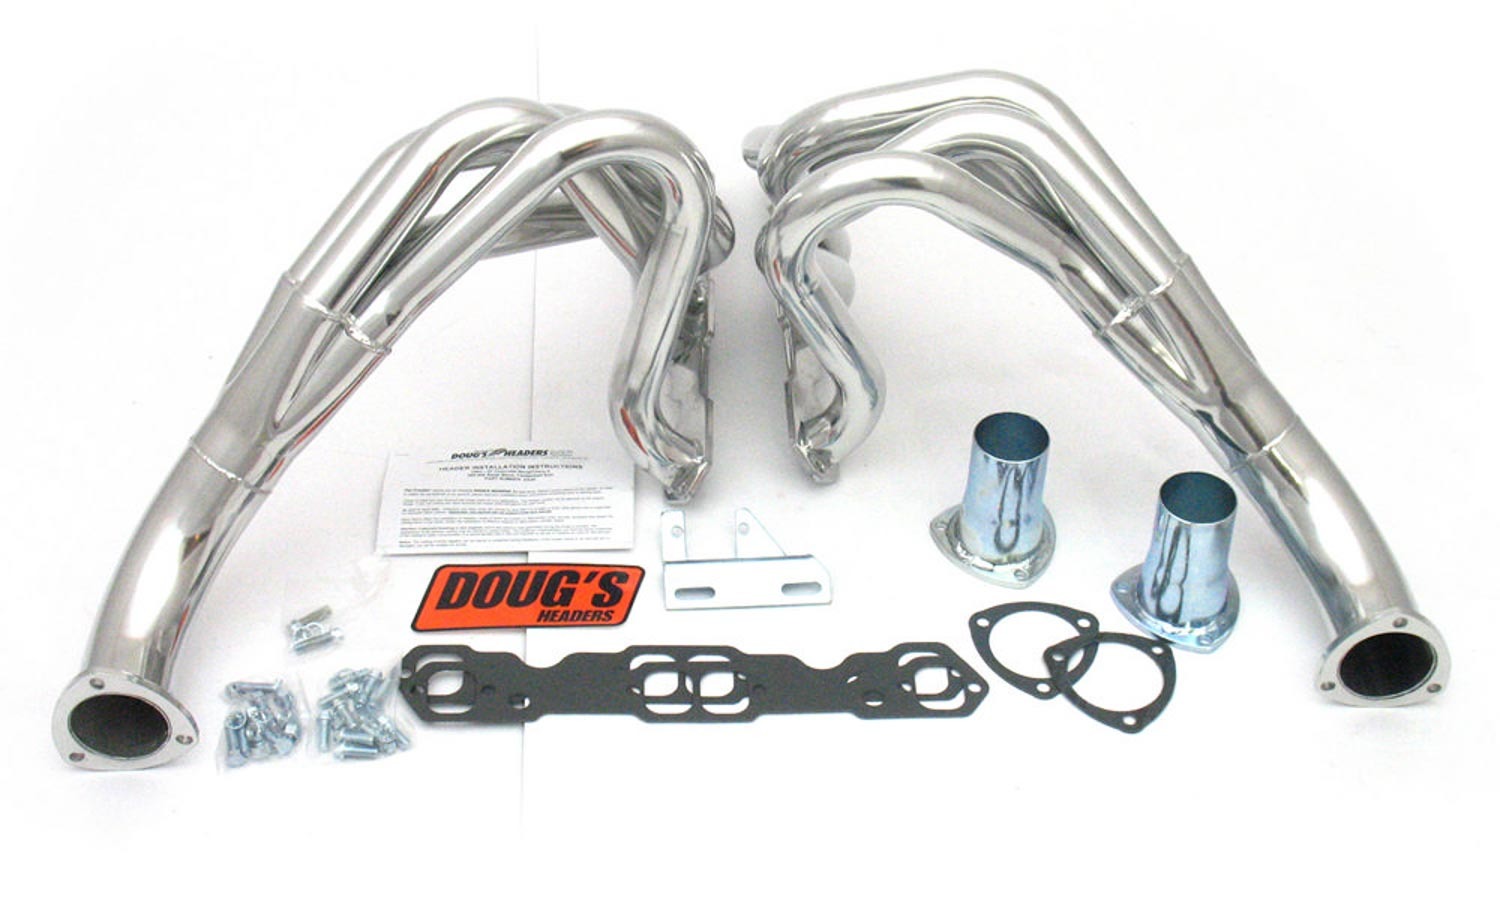 Dougs Headers D329 Headers, Full Length, 1-3/4 in Primary, 3 in Collector, Steel, Ceramic, Small Block Chevy, GM X-Body 1967-69 / X-Body 1962-67, Pair